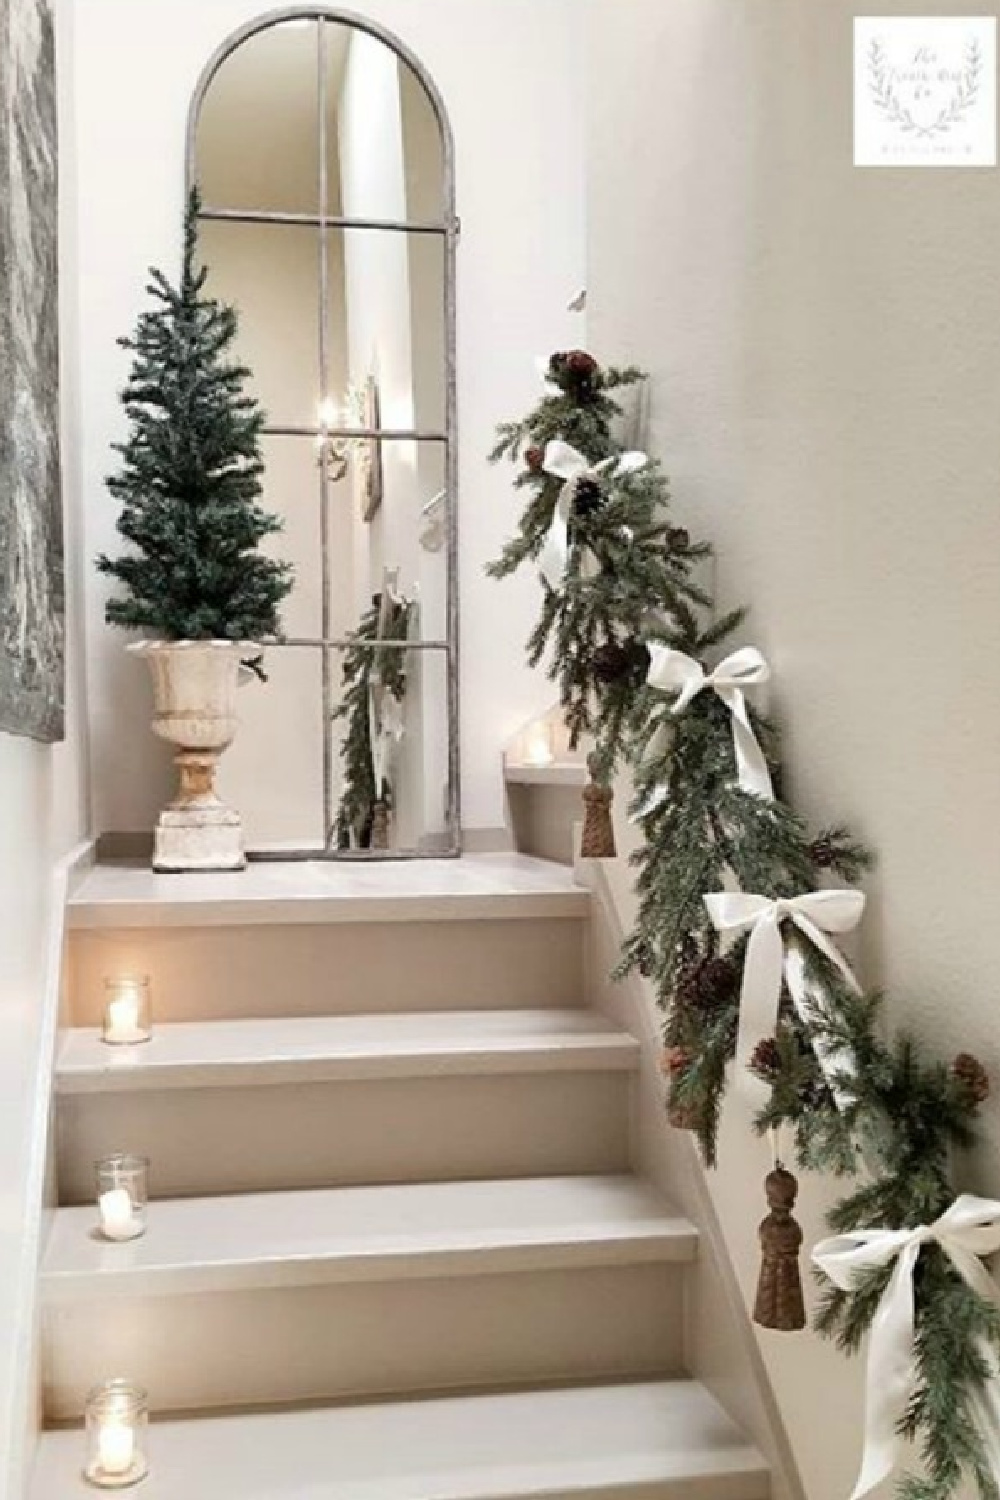 French country Christmas decorated staircase with garland and white ribbon on rail and candles on steps - The French Nest Co Interior Design. #frenchcountryholiday